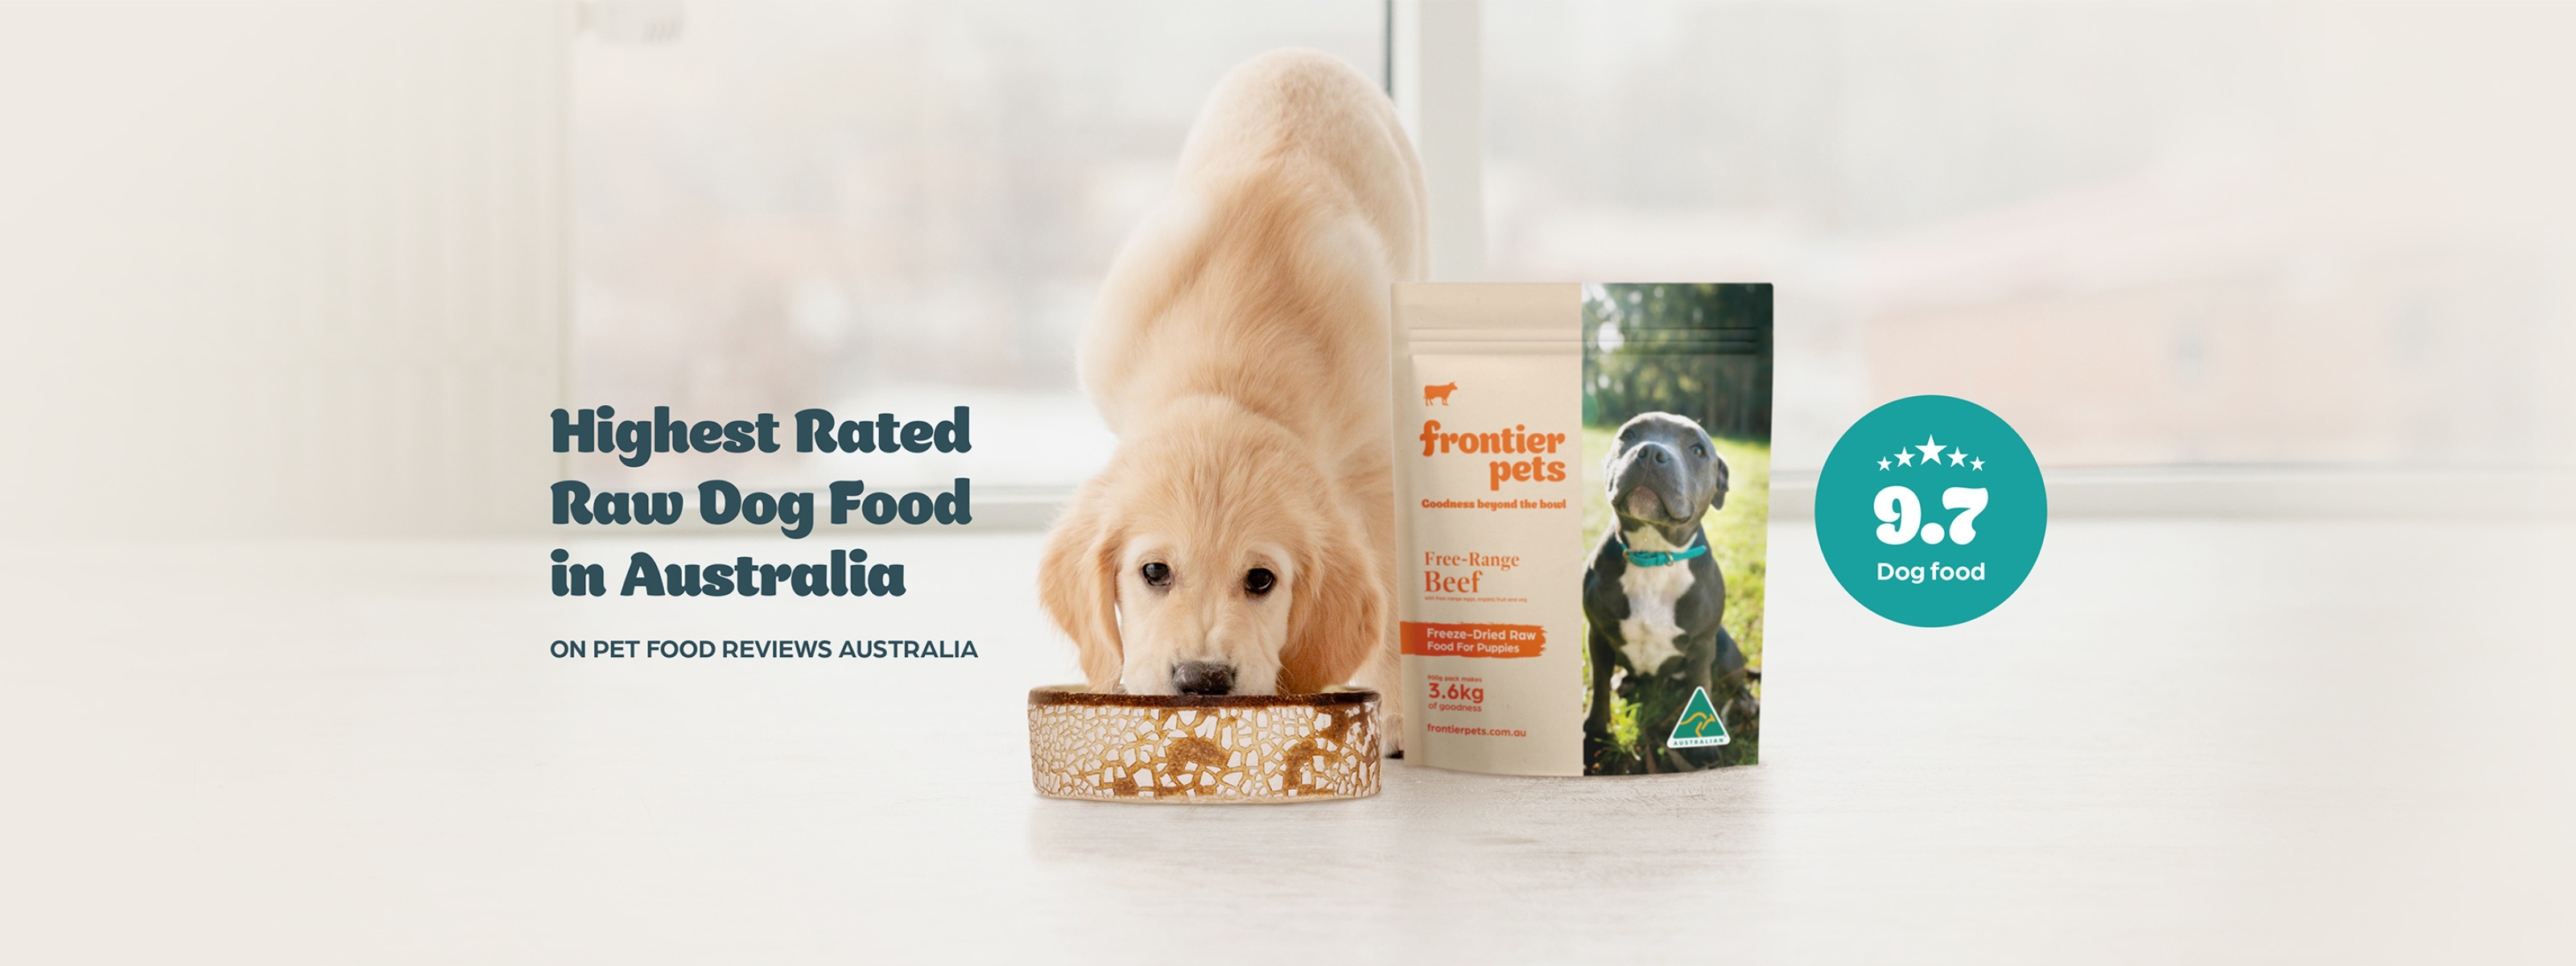 Highest Rated Puppy Food